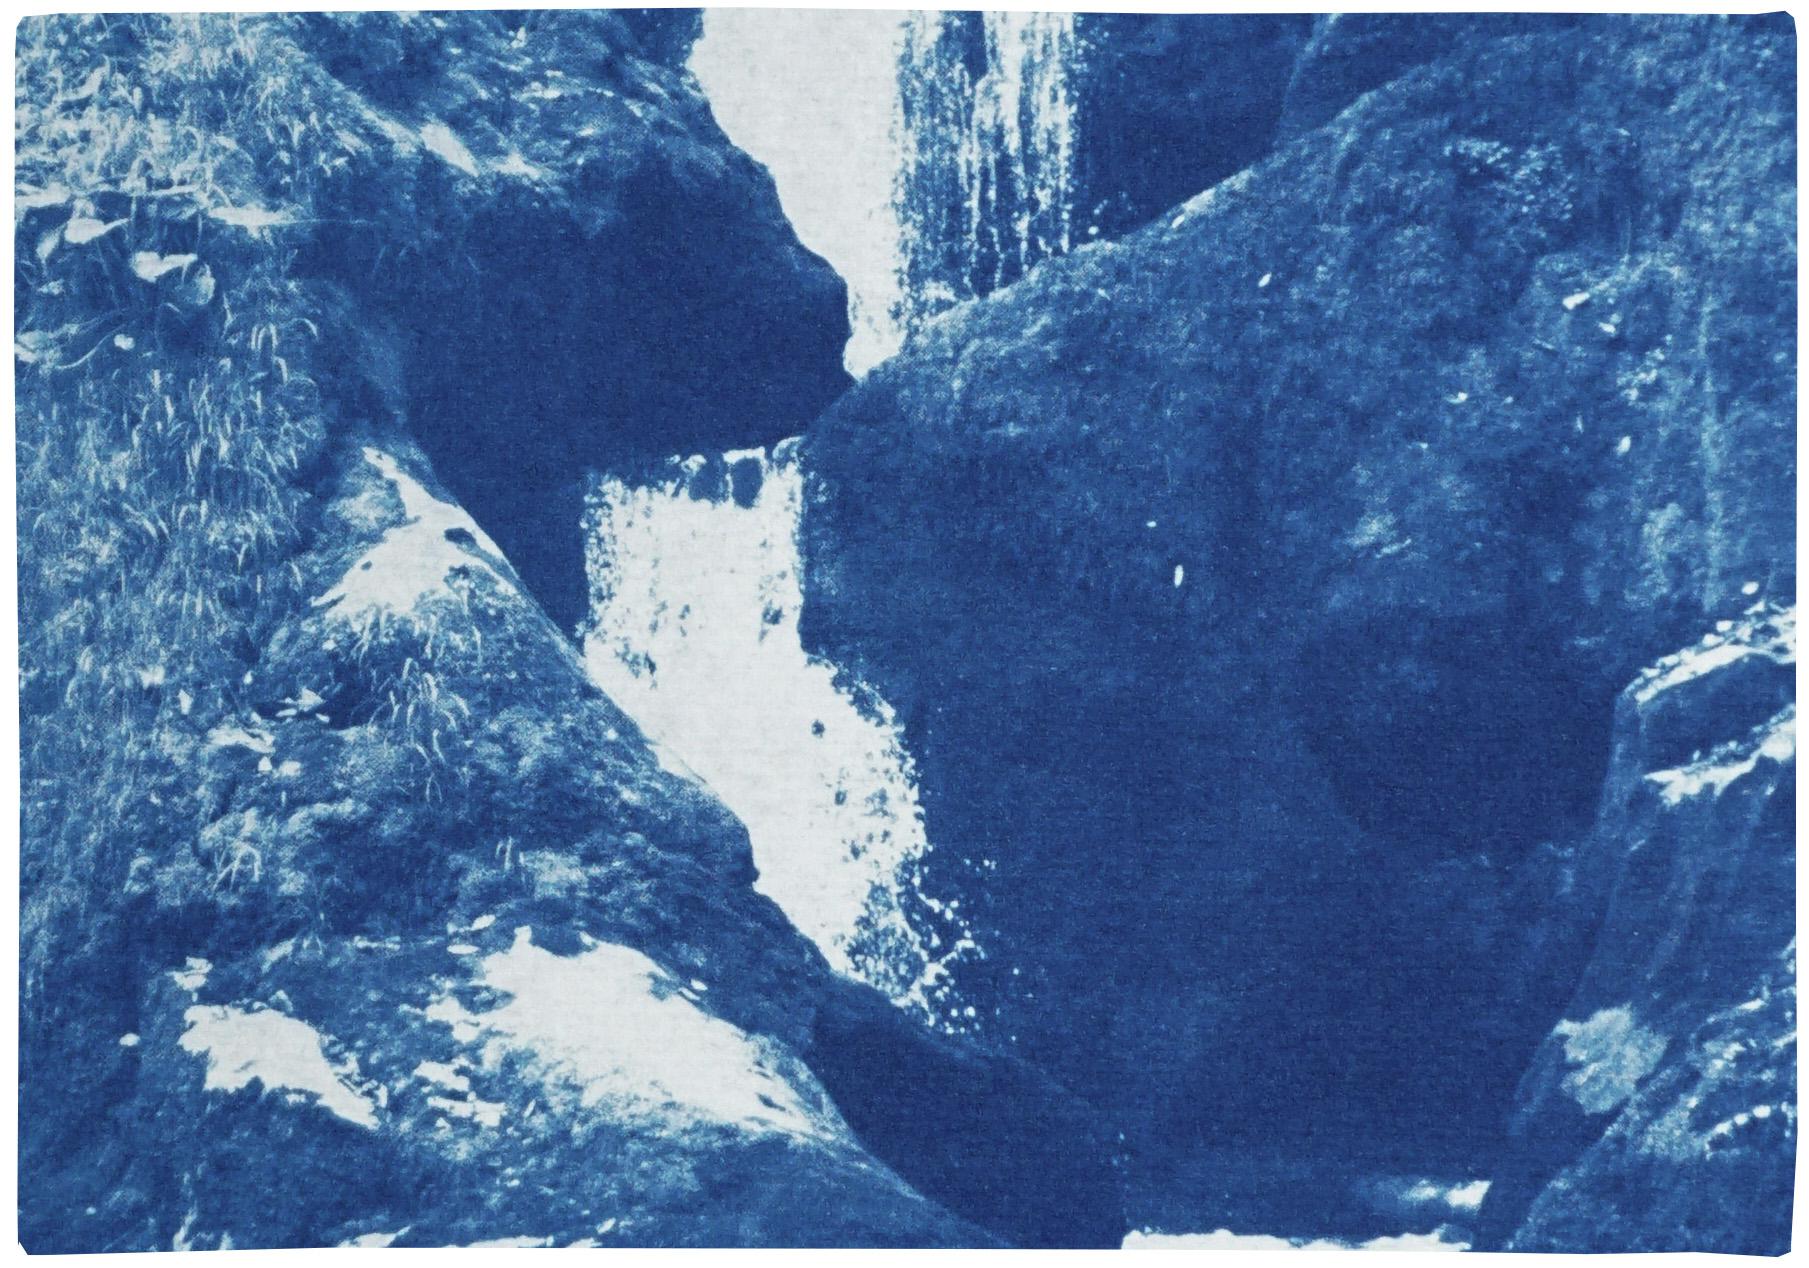 Vertical Triptych of Zen Forest Waterfall, Multi Panel Cyanotype, Feng Shui Art  - Naturalistic Photograph by Kind of Cyan